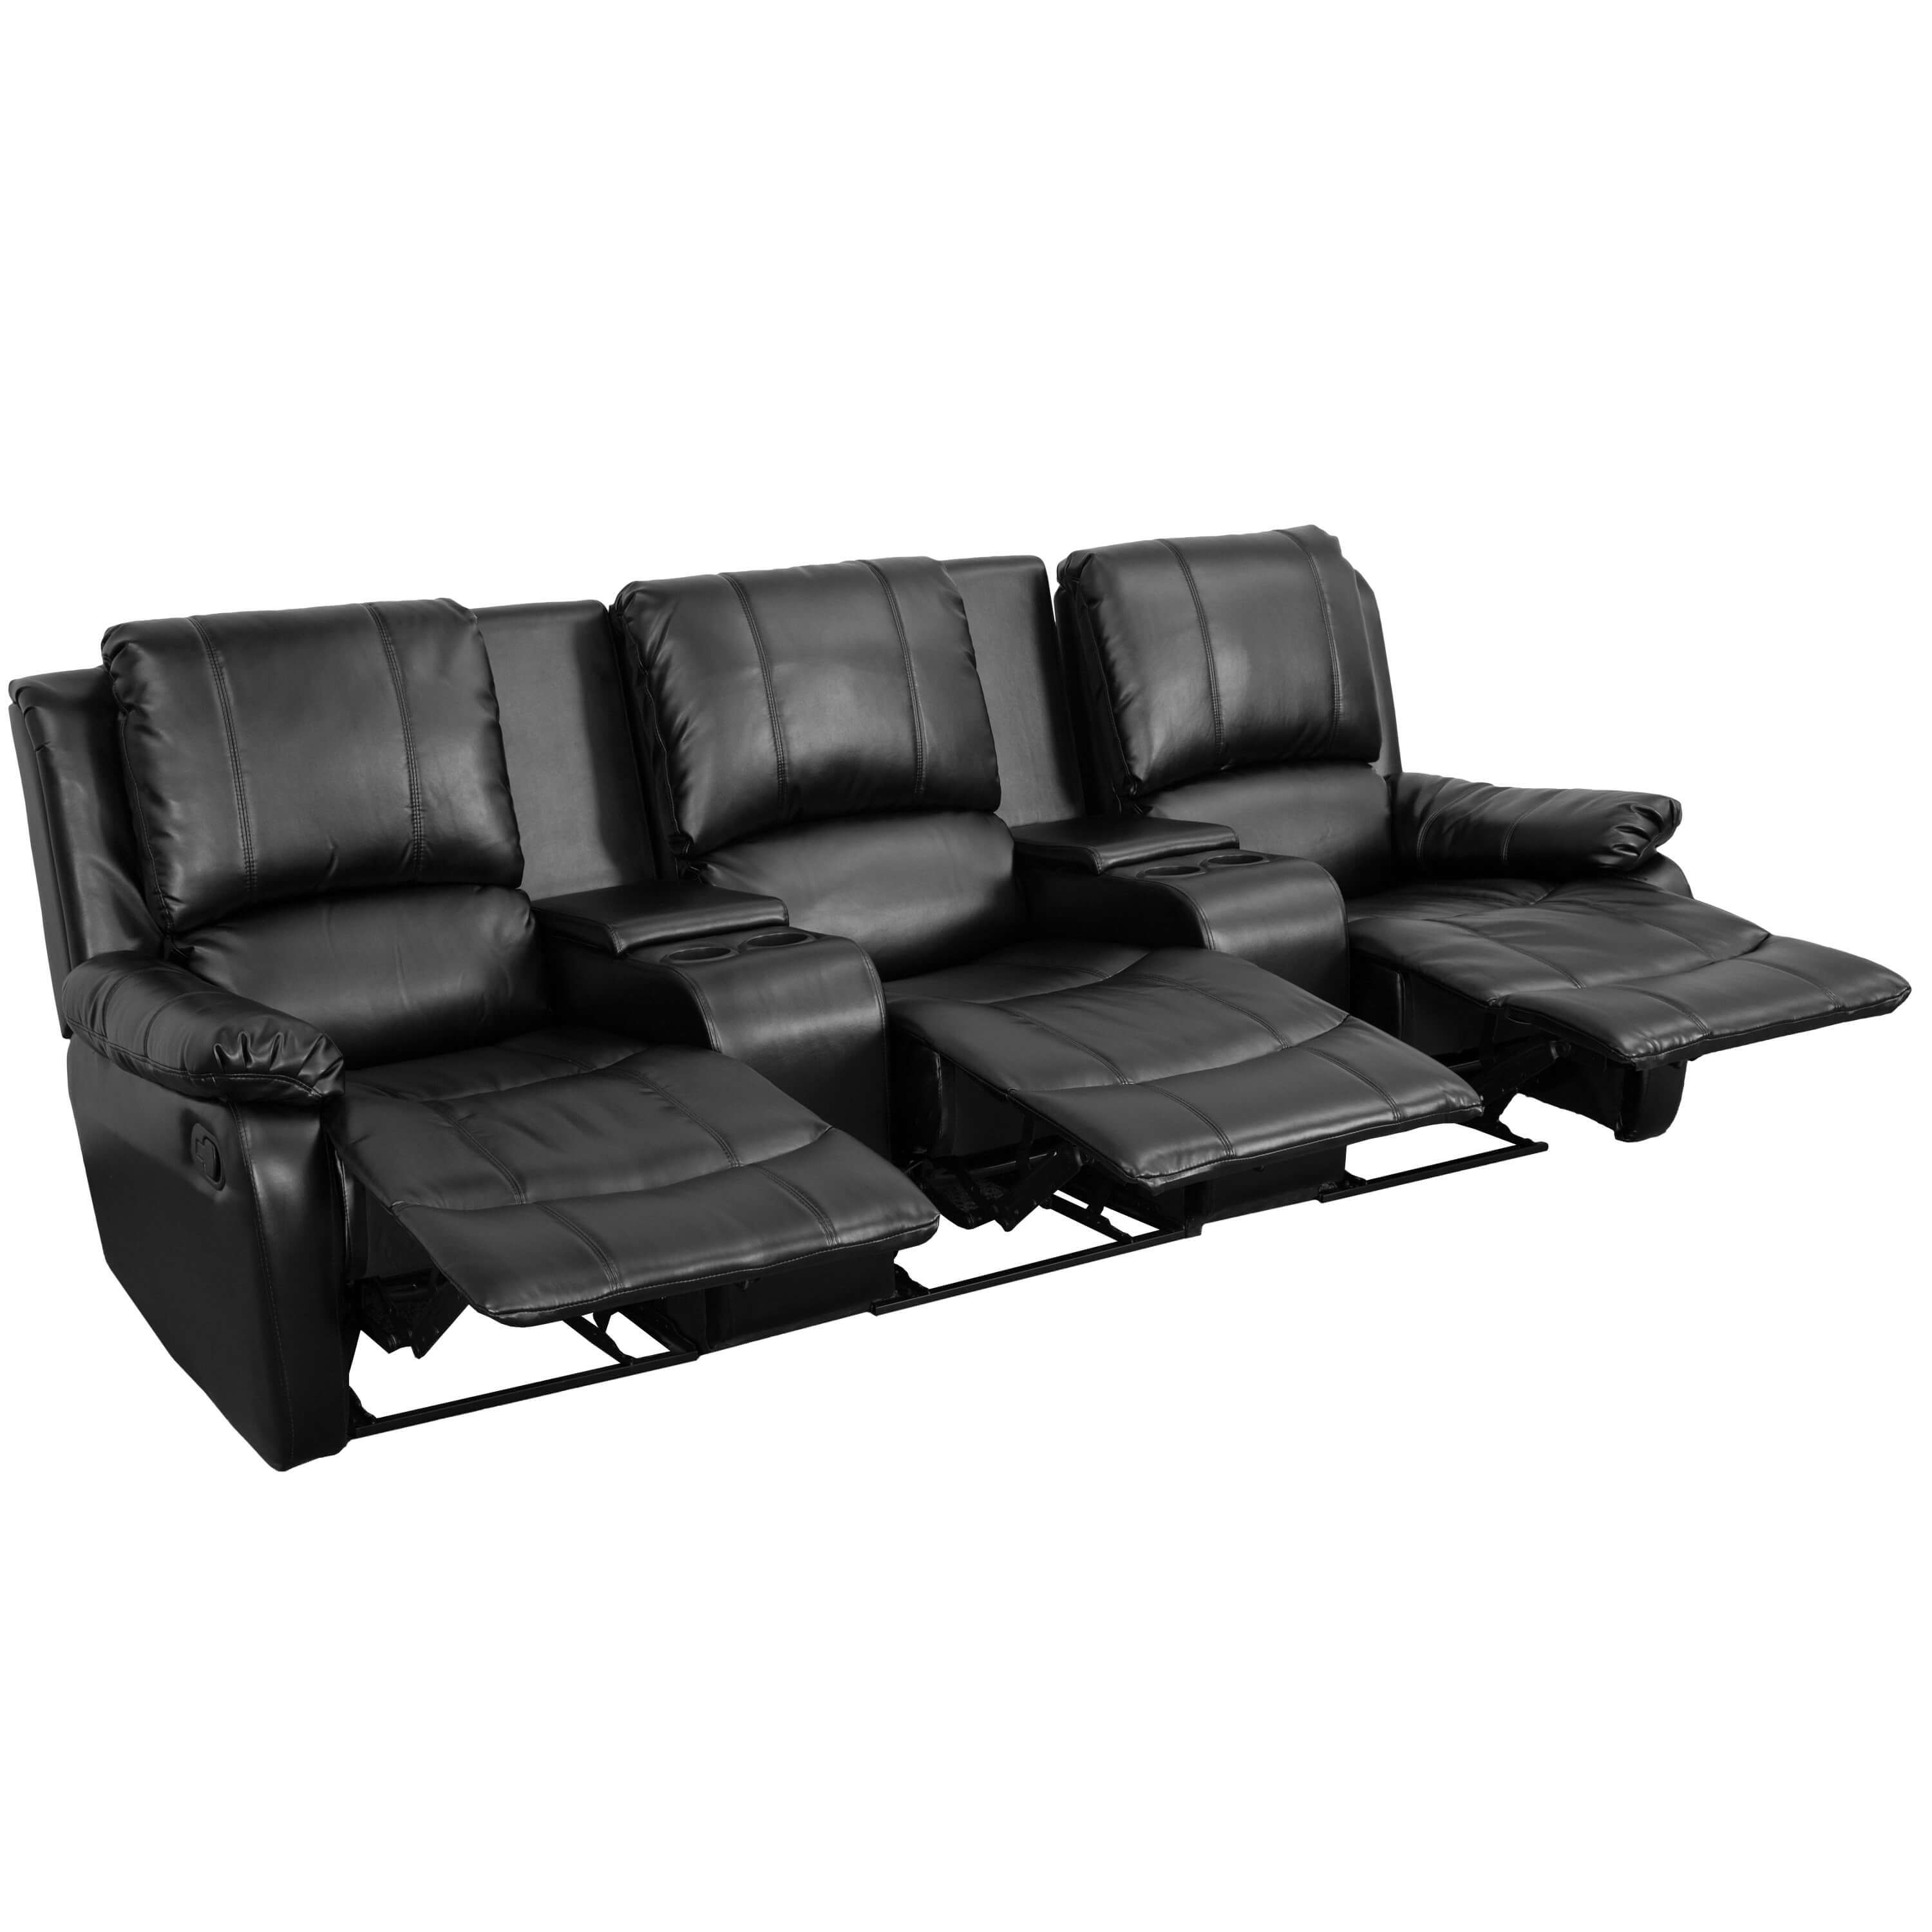 Leather theater chairs reclined view